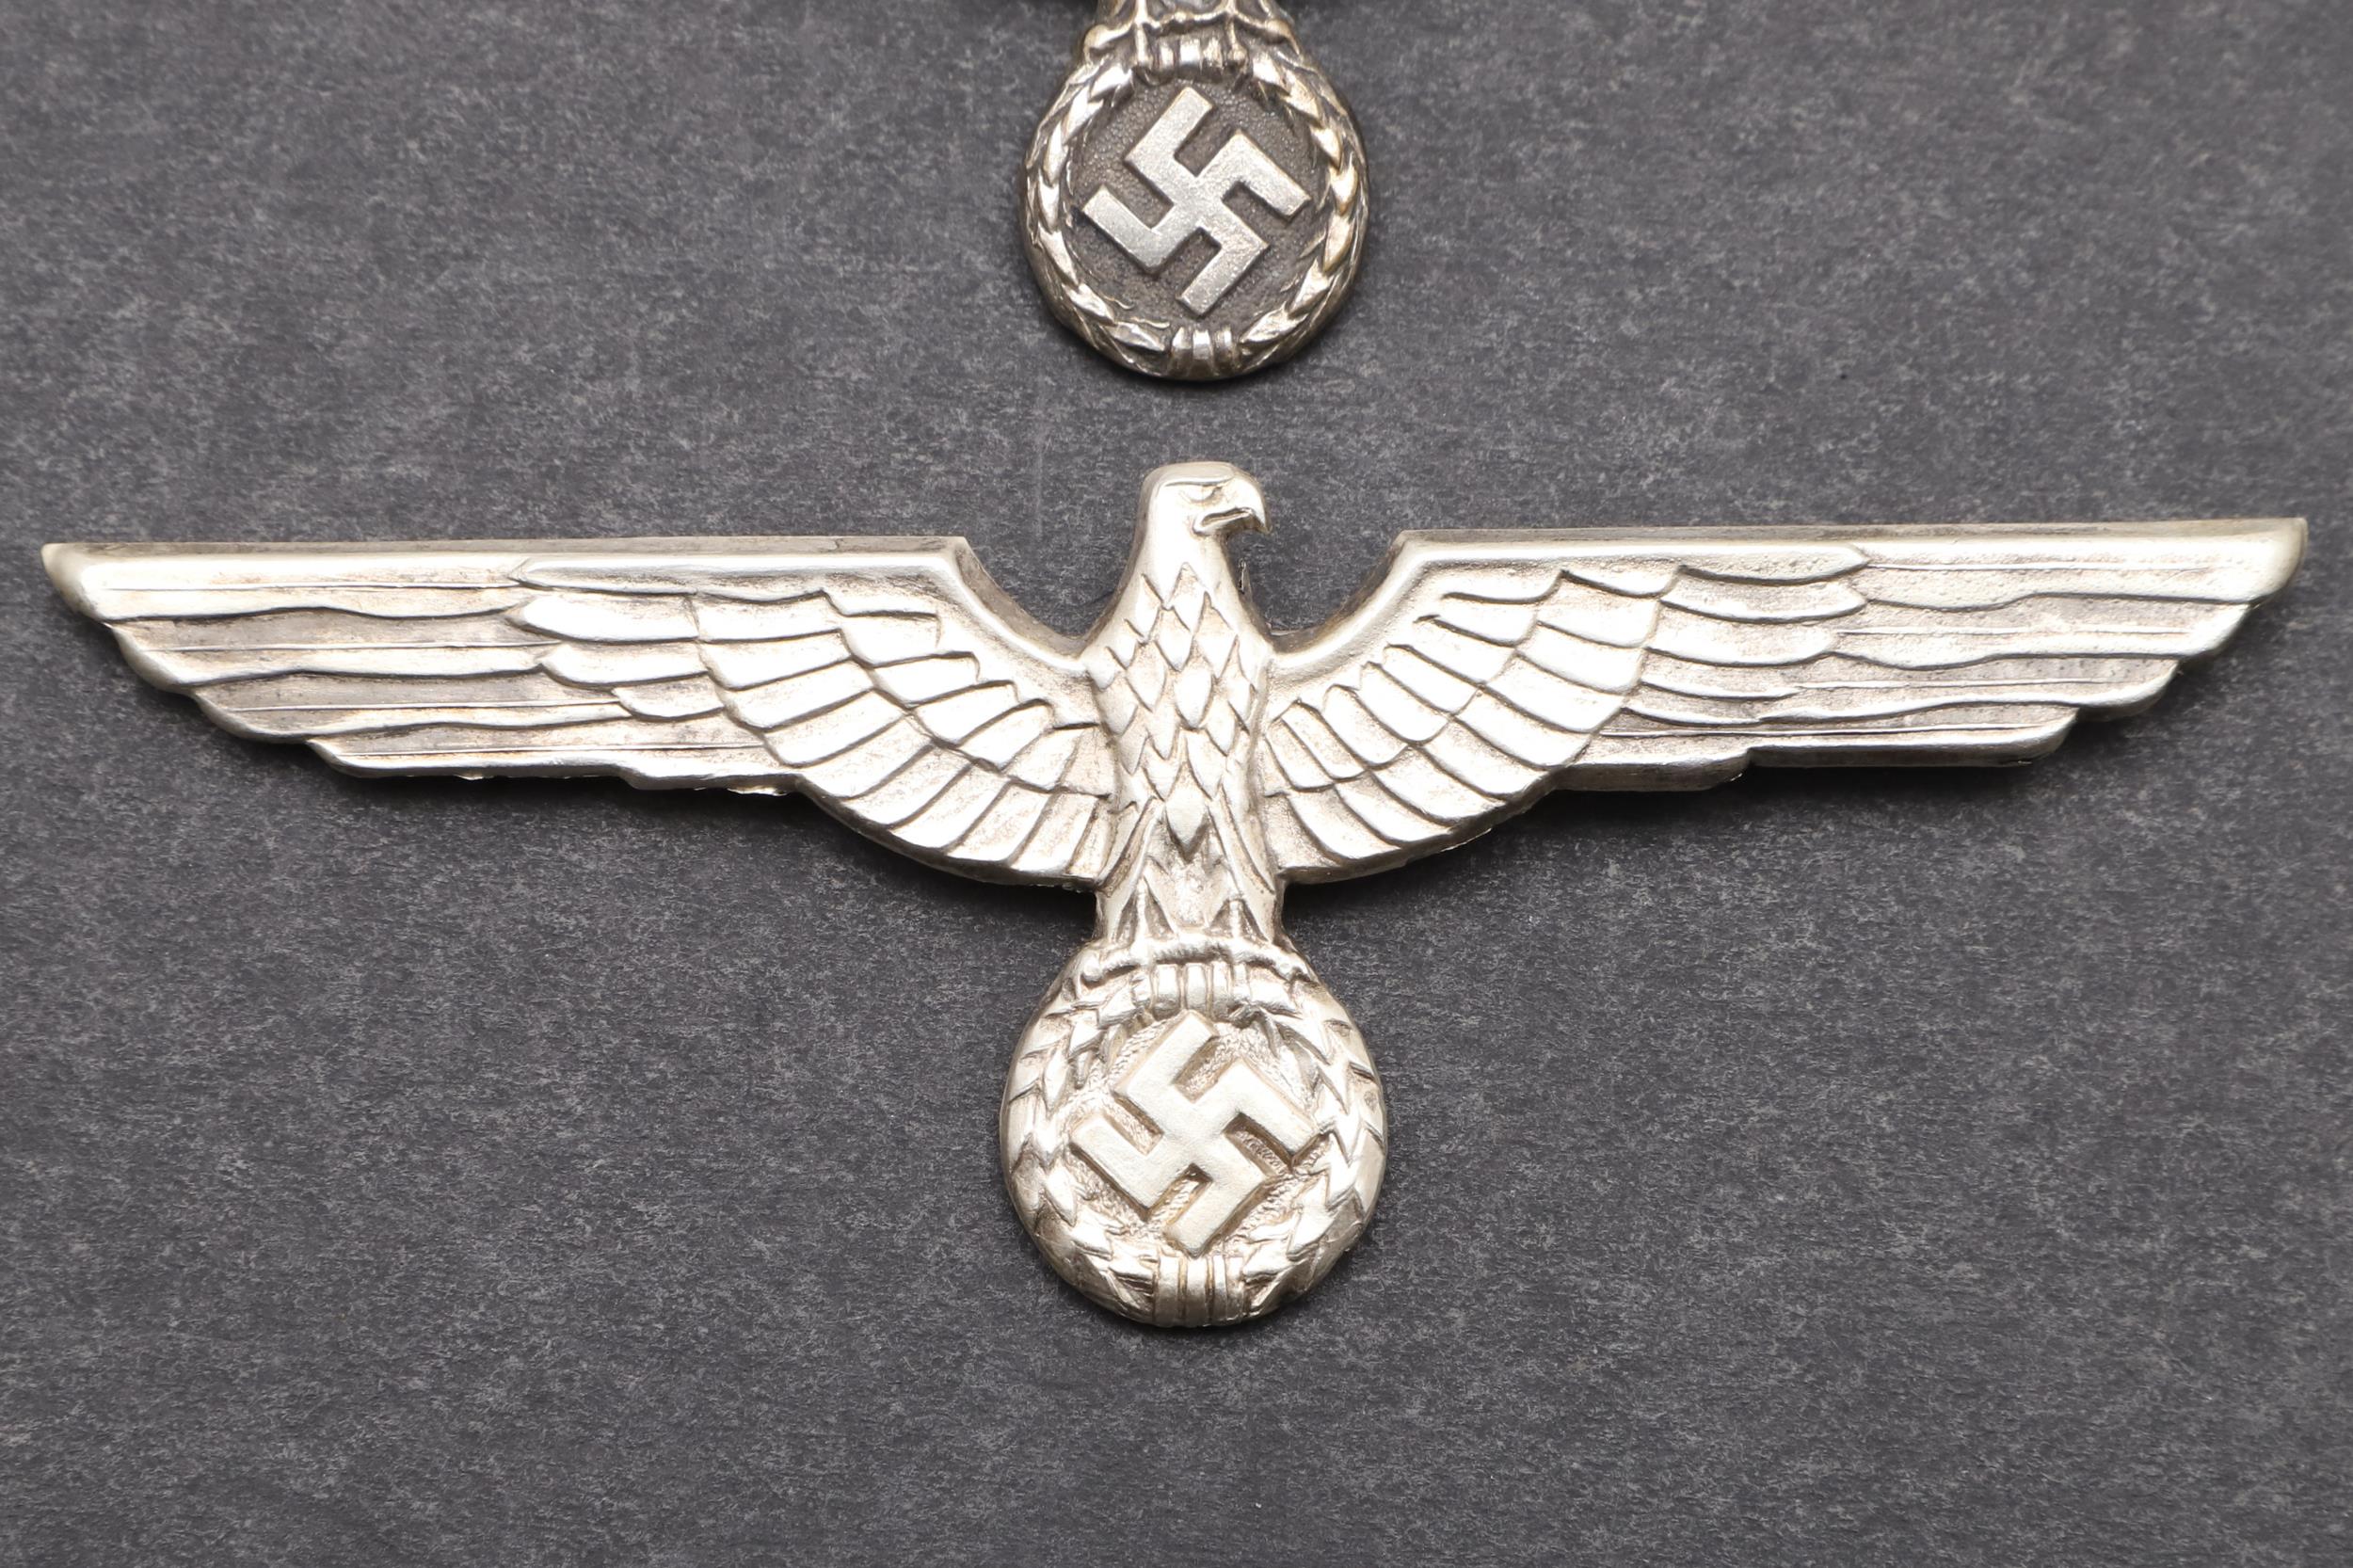 TWO SECOND WORLD WAR GERMAN ARMY OFFICER'S BREAST EAGLES. - Image 4 of 6